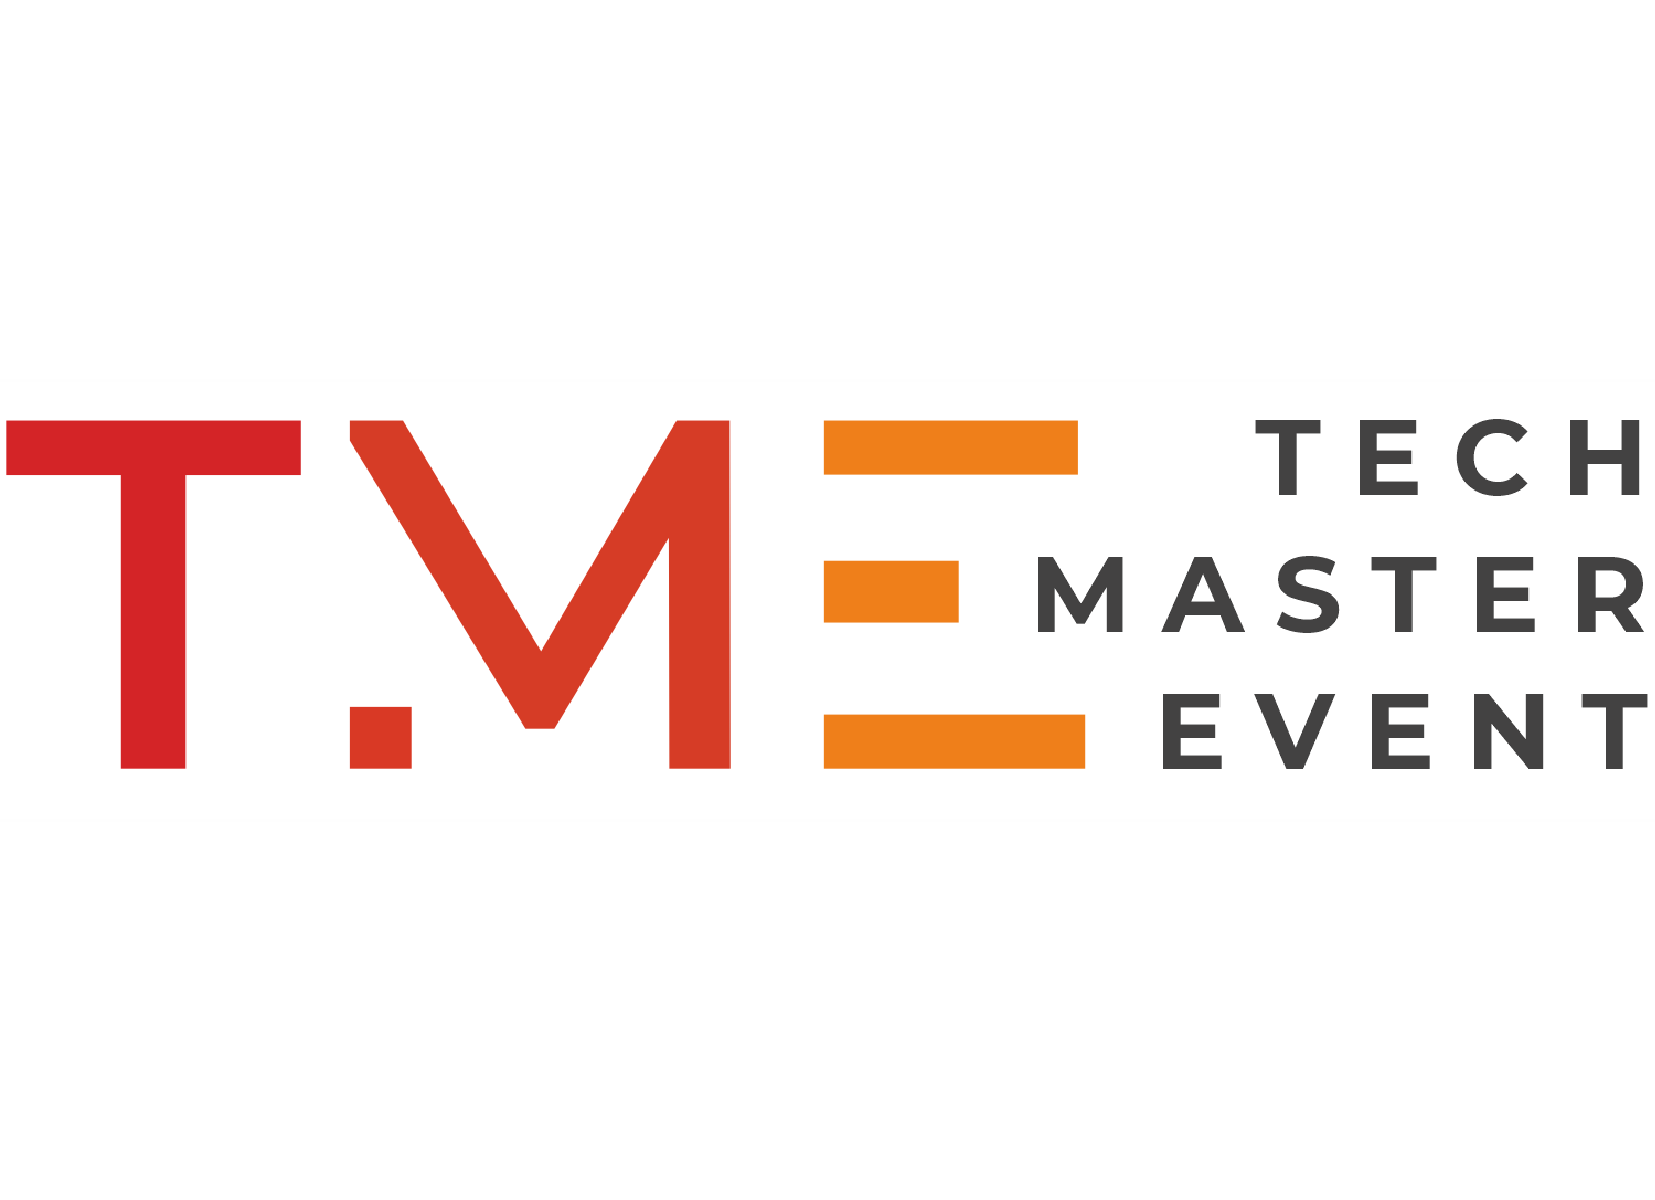 Tech Master Event . The Event that includes everybody.